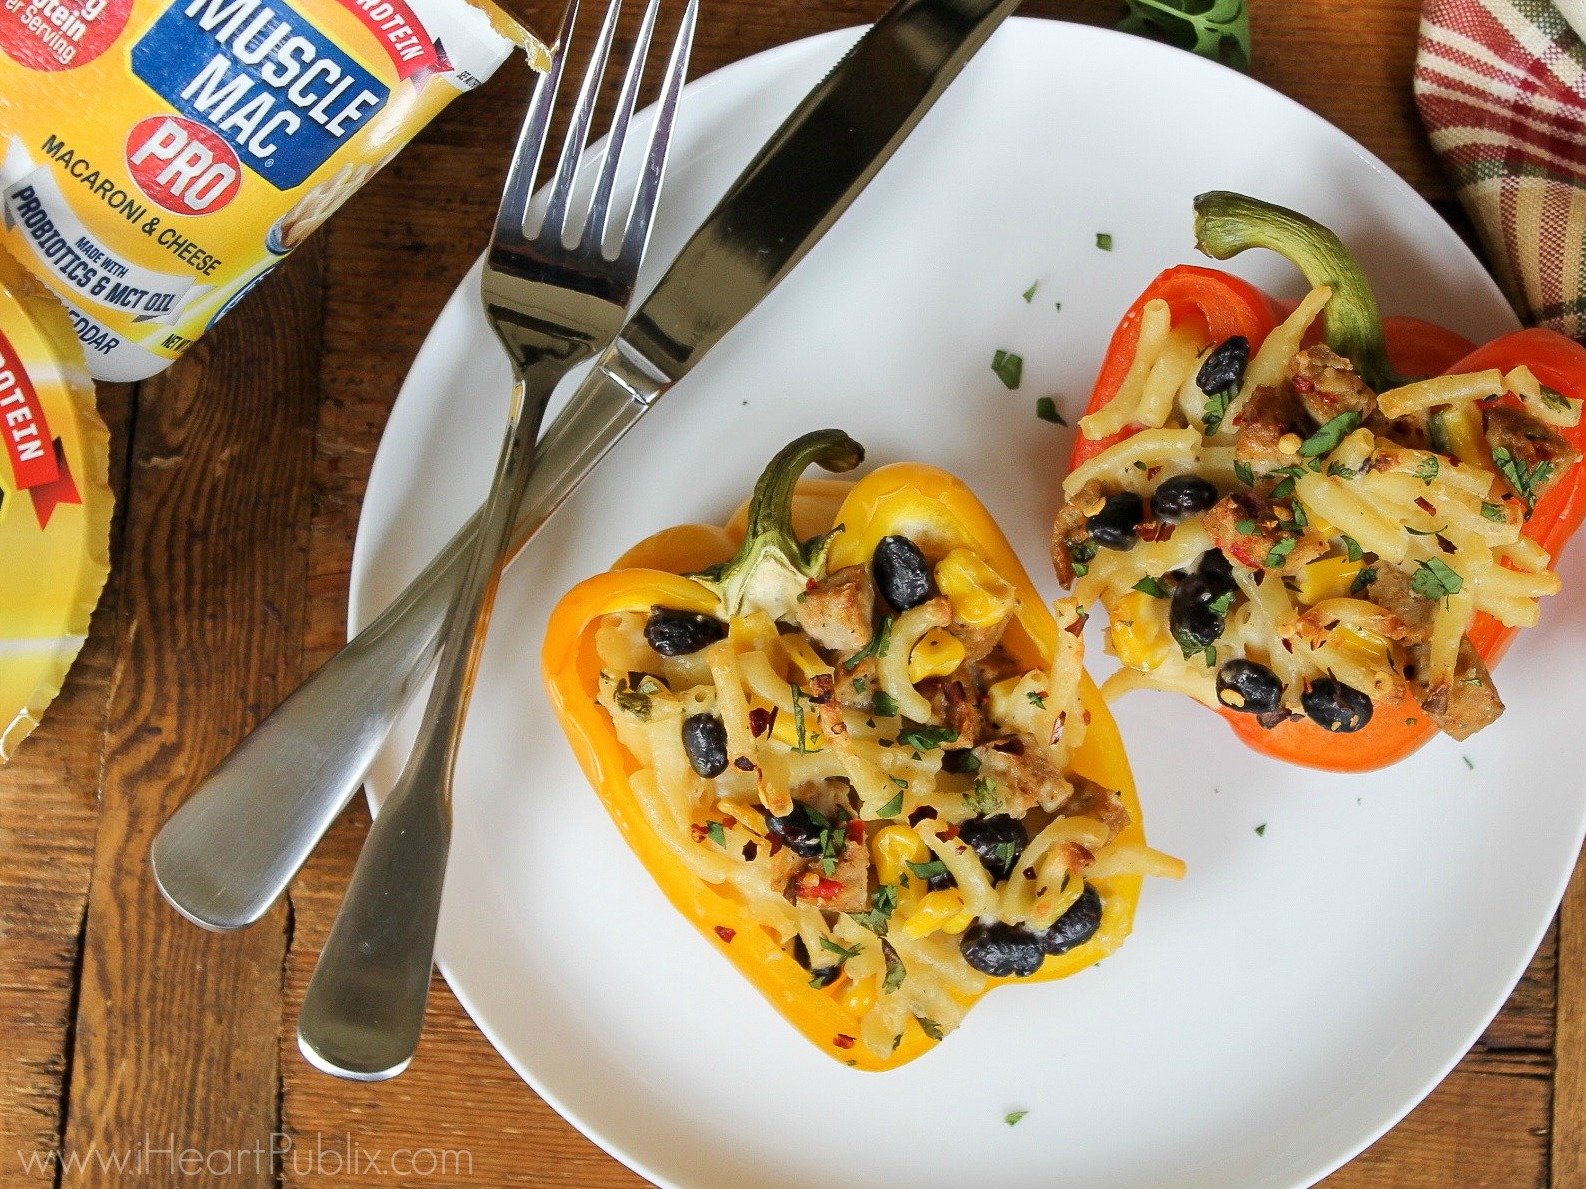 Mac & Cheese Southwest Stuffed Peppers Made With Muscle Mac Macaroni & Cheese